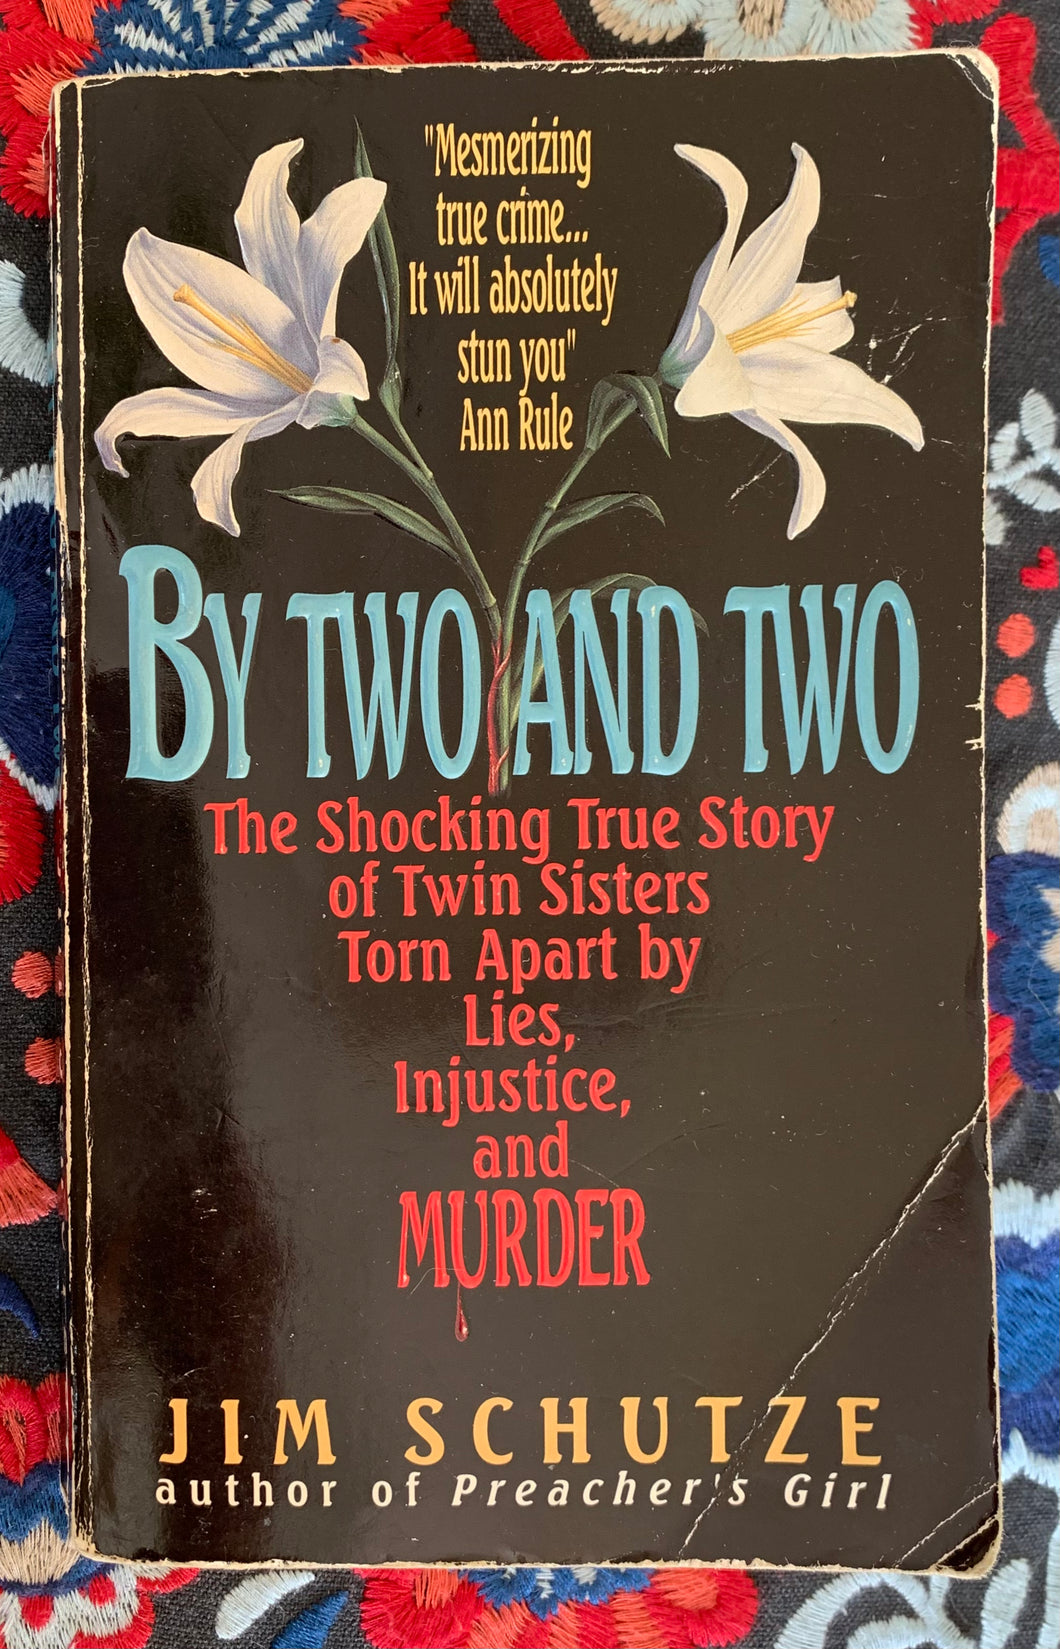 By Two And Two: The Shocking True Story of Twin Sisters Torn Apart by Lies, Injustice, and MURDER